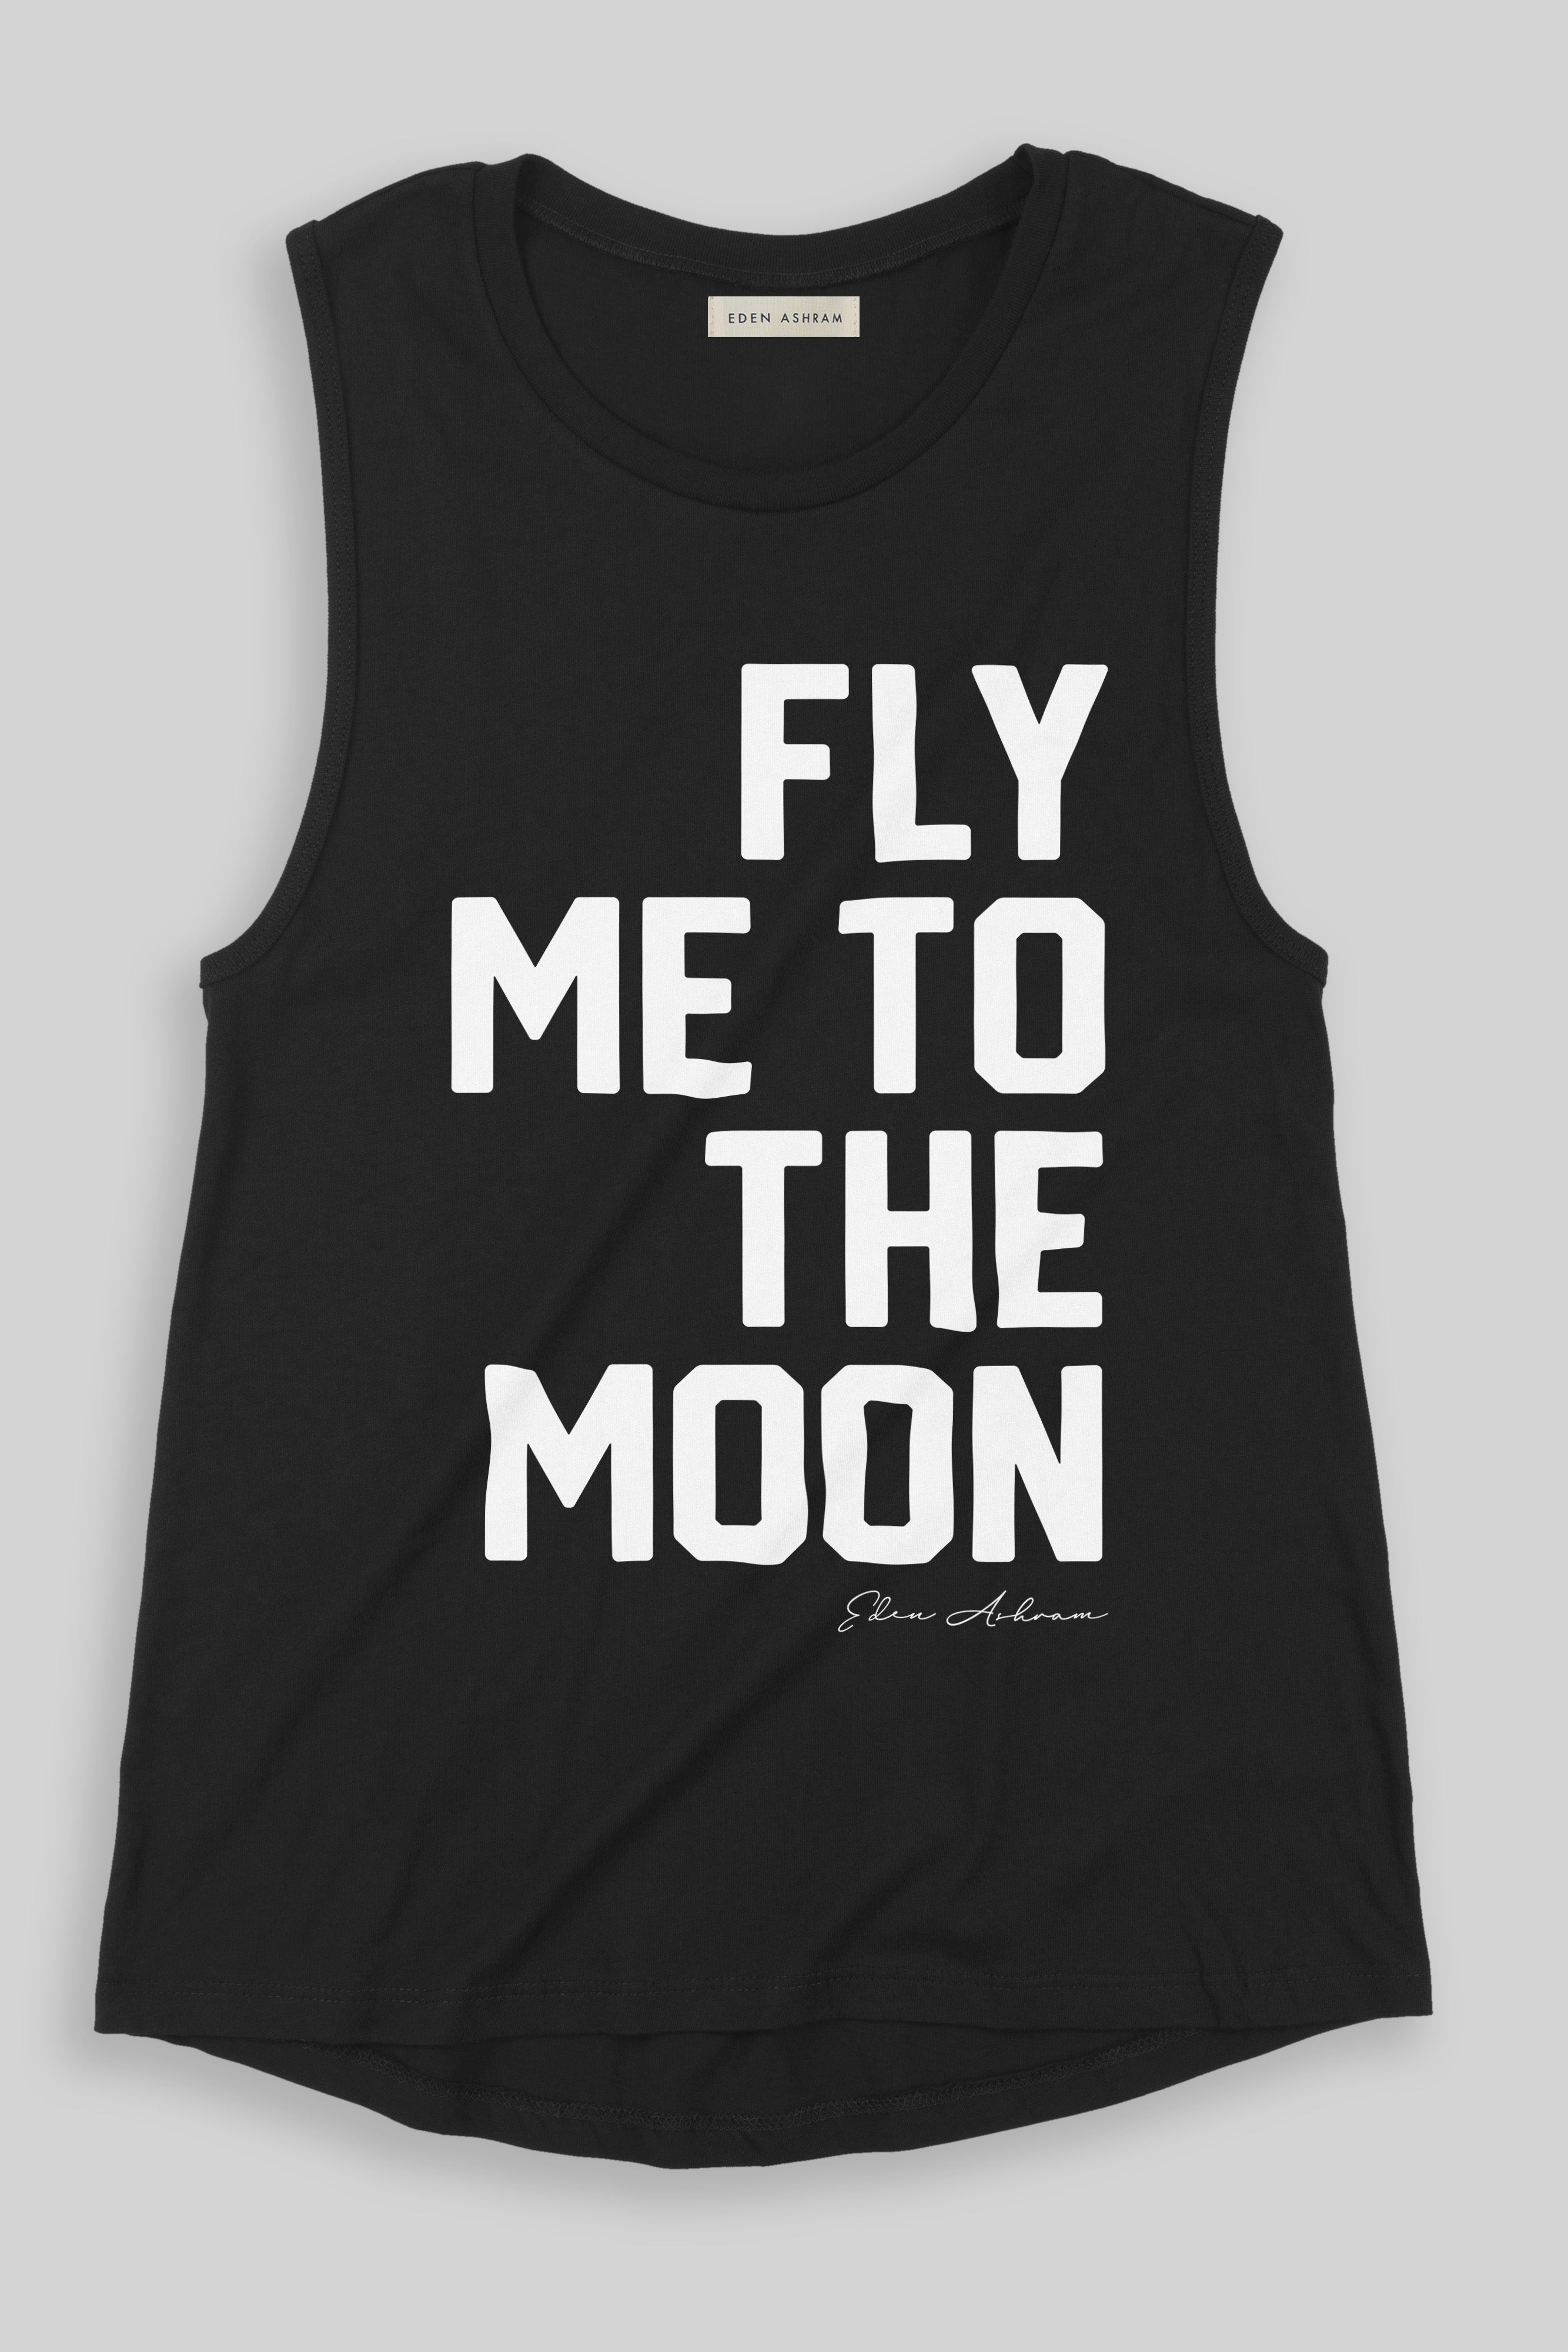 EDEN ASHRAM Fly Me To The Moon Jersey Muscle Tank Black